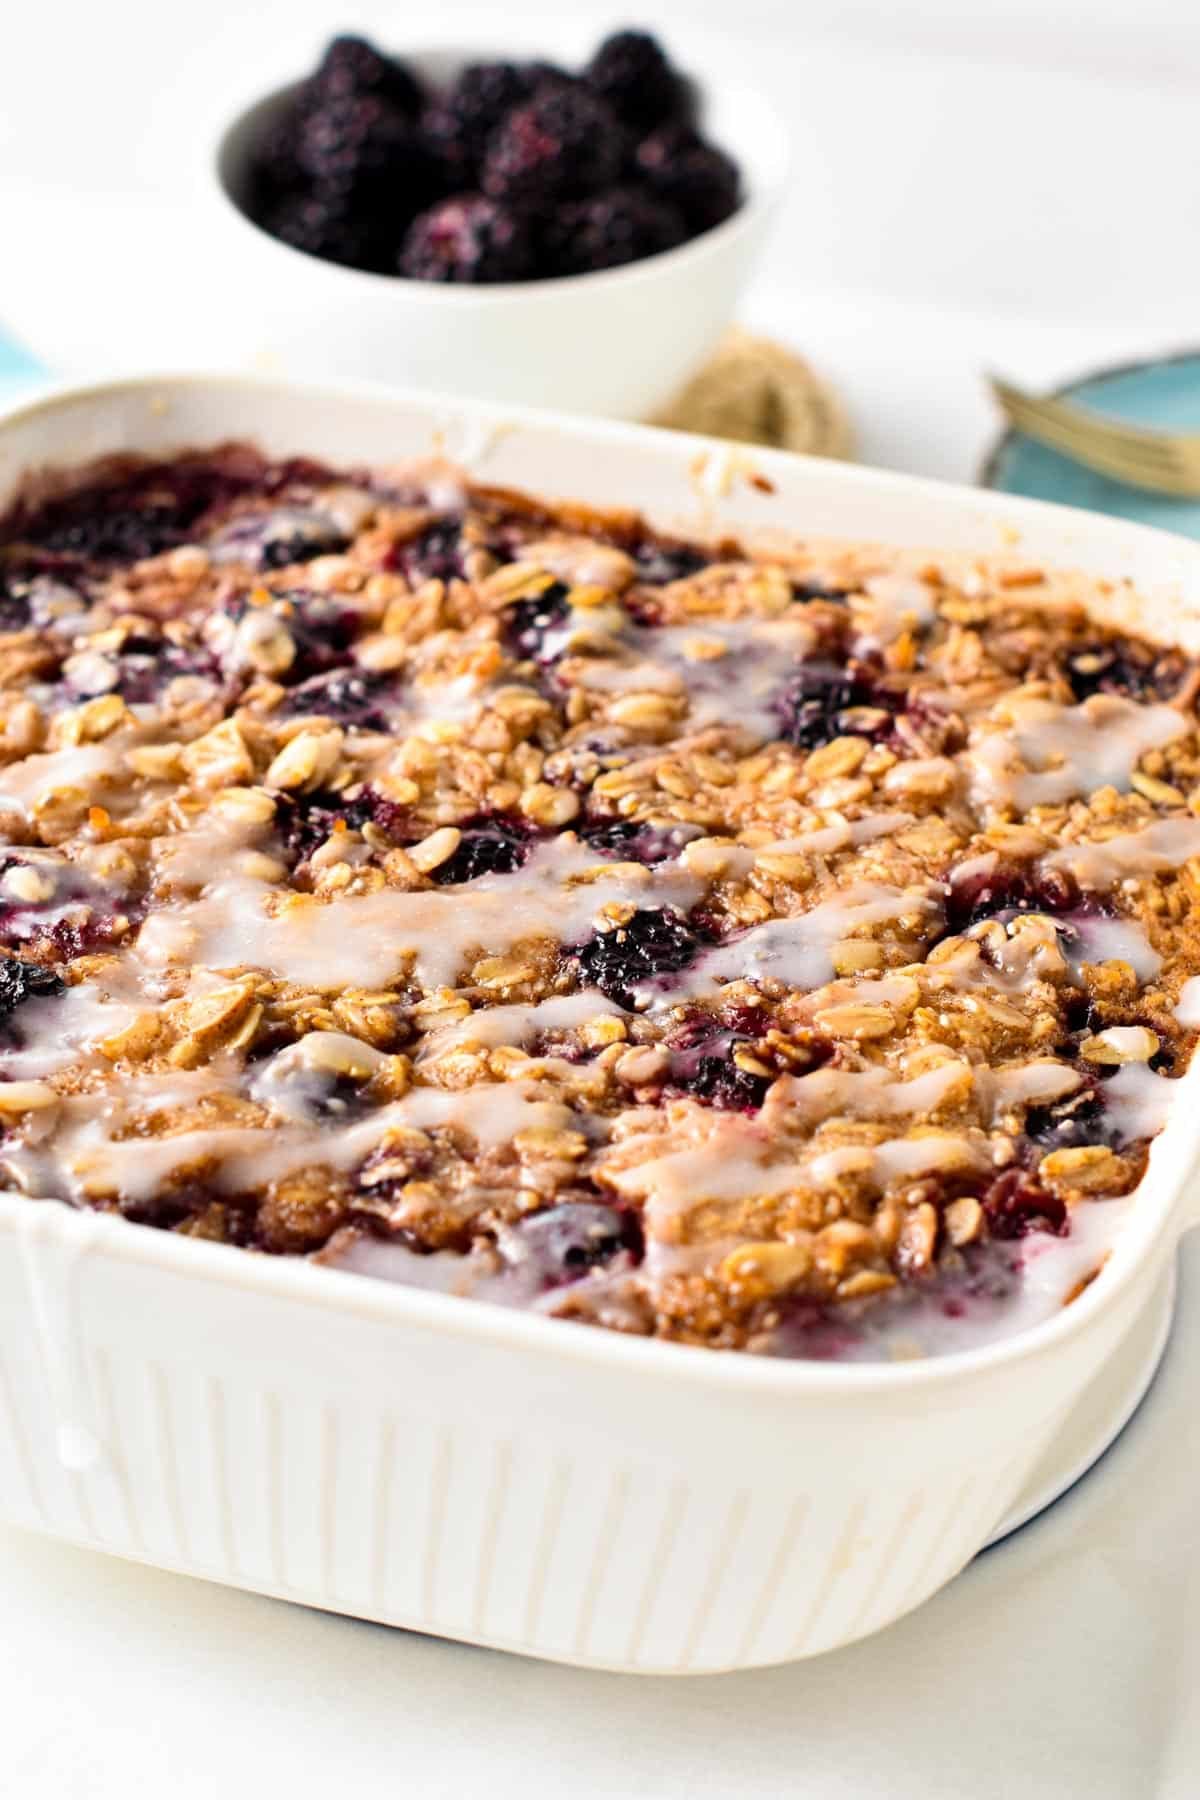 This Blackberry Oatmeal Bake is an easy, healthy one-pan oatmeal breakfast filled with juicy blackberries. It's perfect to feed healthy breakfast to all the family on busy morning and starts the day full of energy.